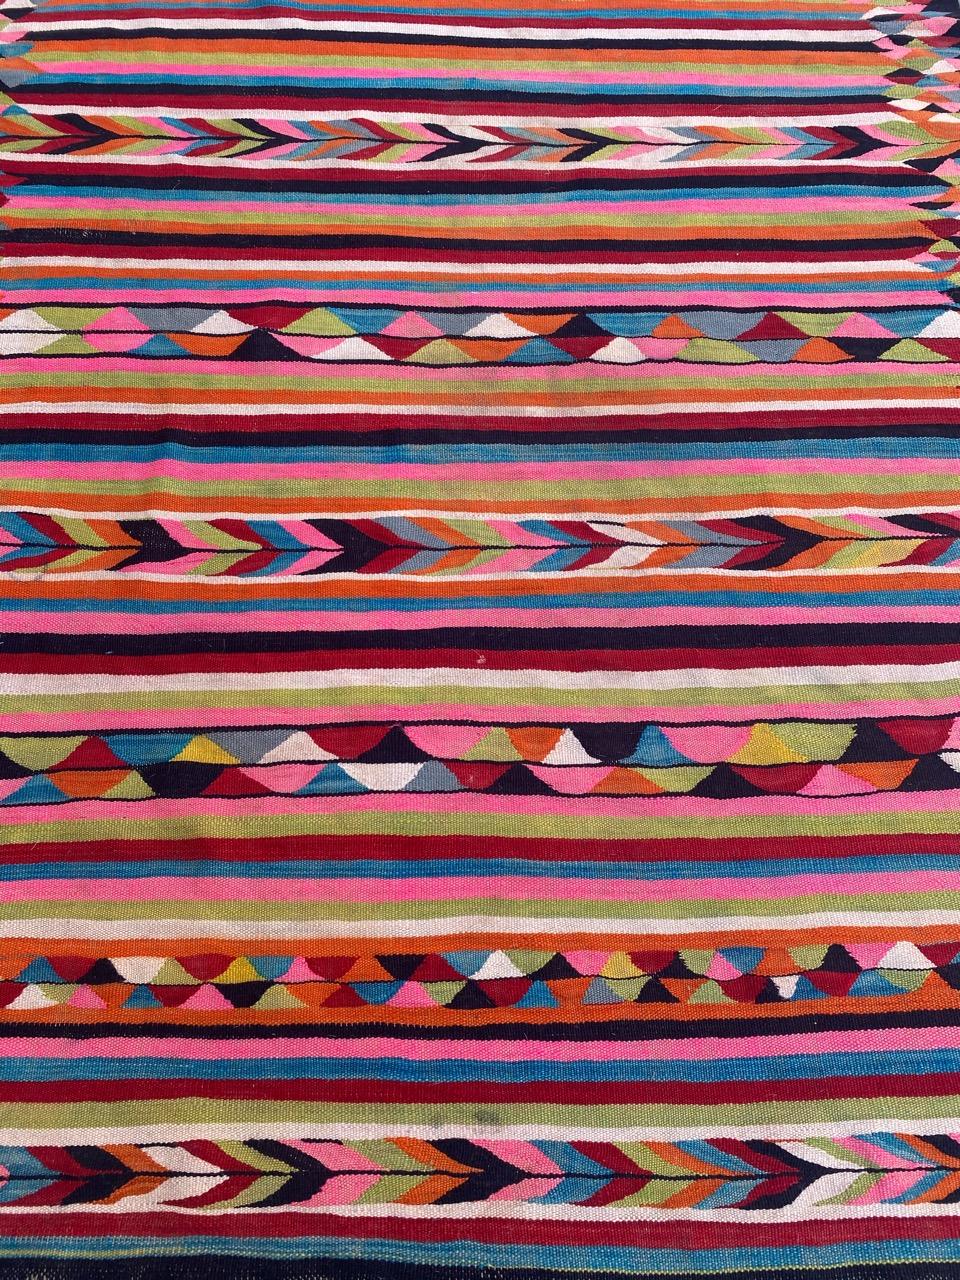 Beautiful mid century Moroccan berbere Kilim with nice geometrical tribal design and beautiful colors, entirely hand woven with wool on wool foundation.

✨✨✨
